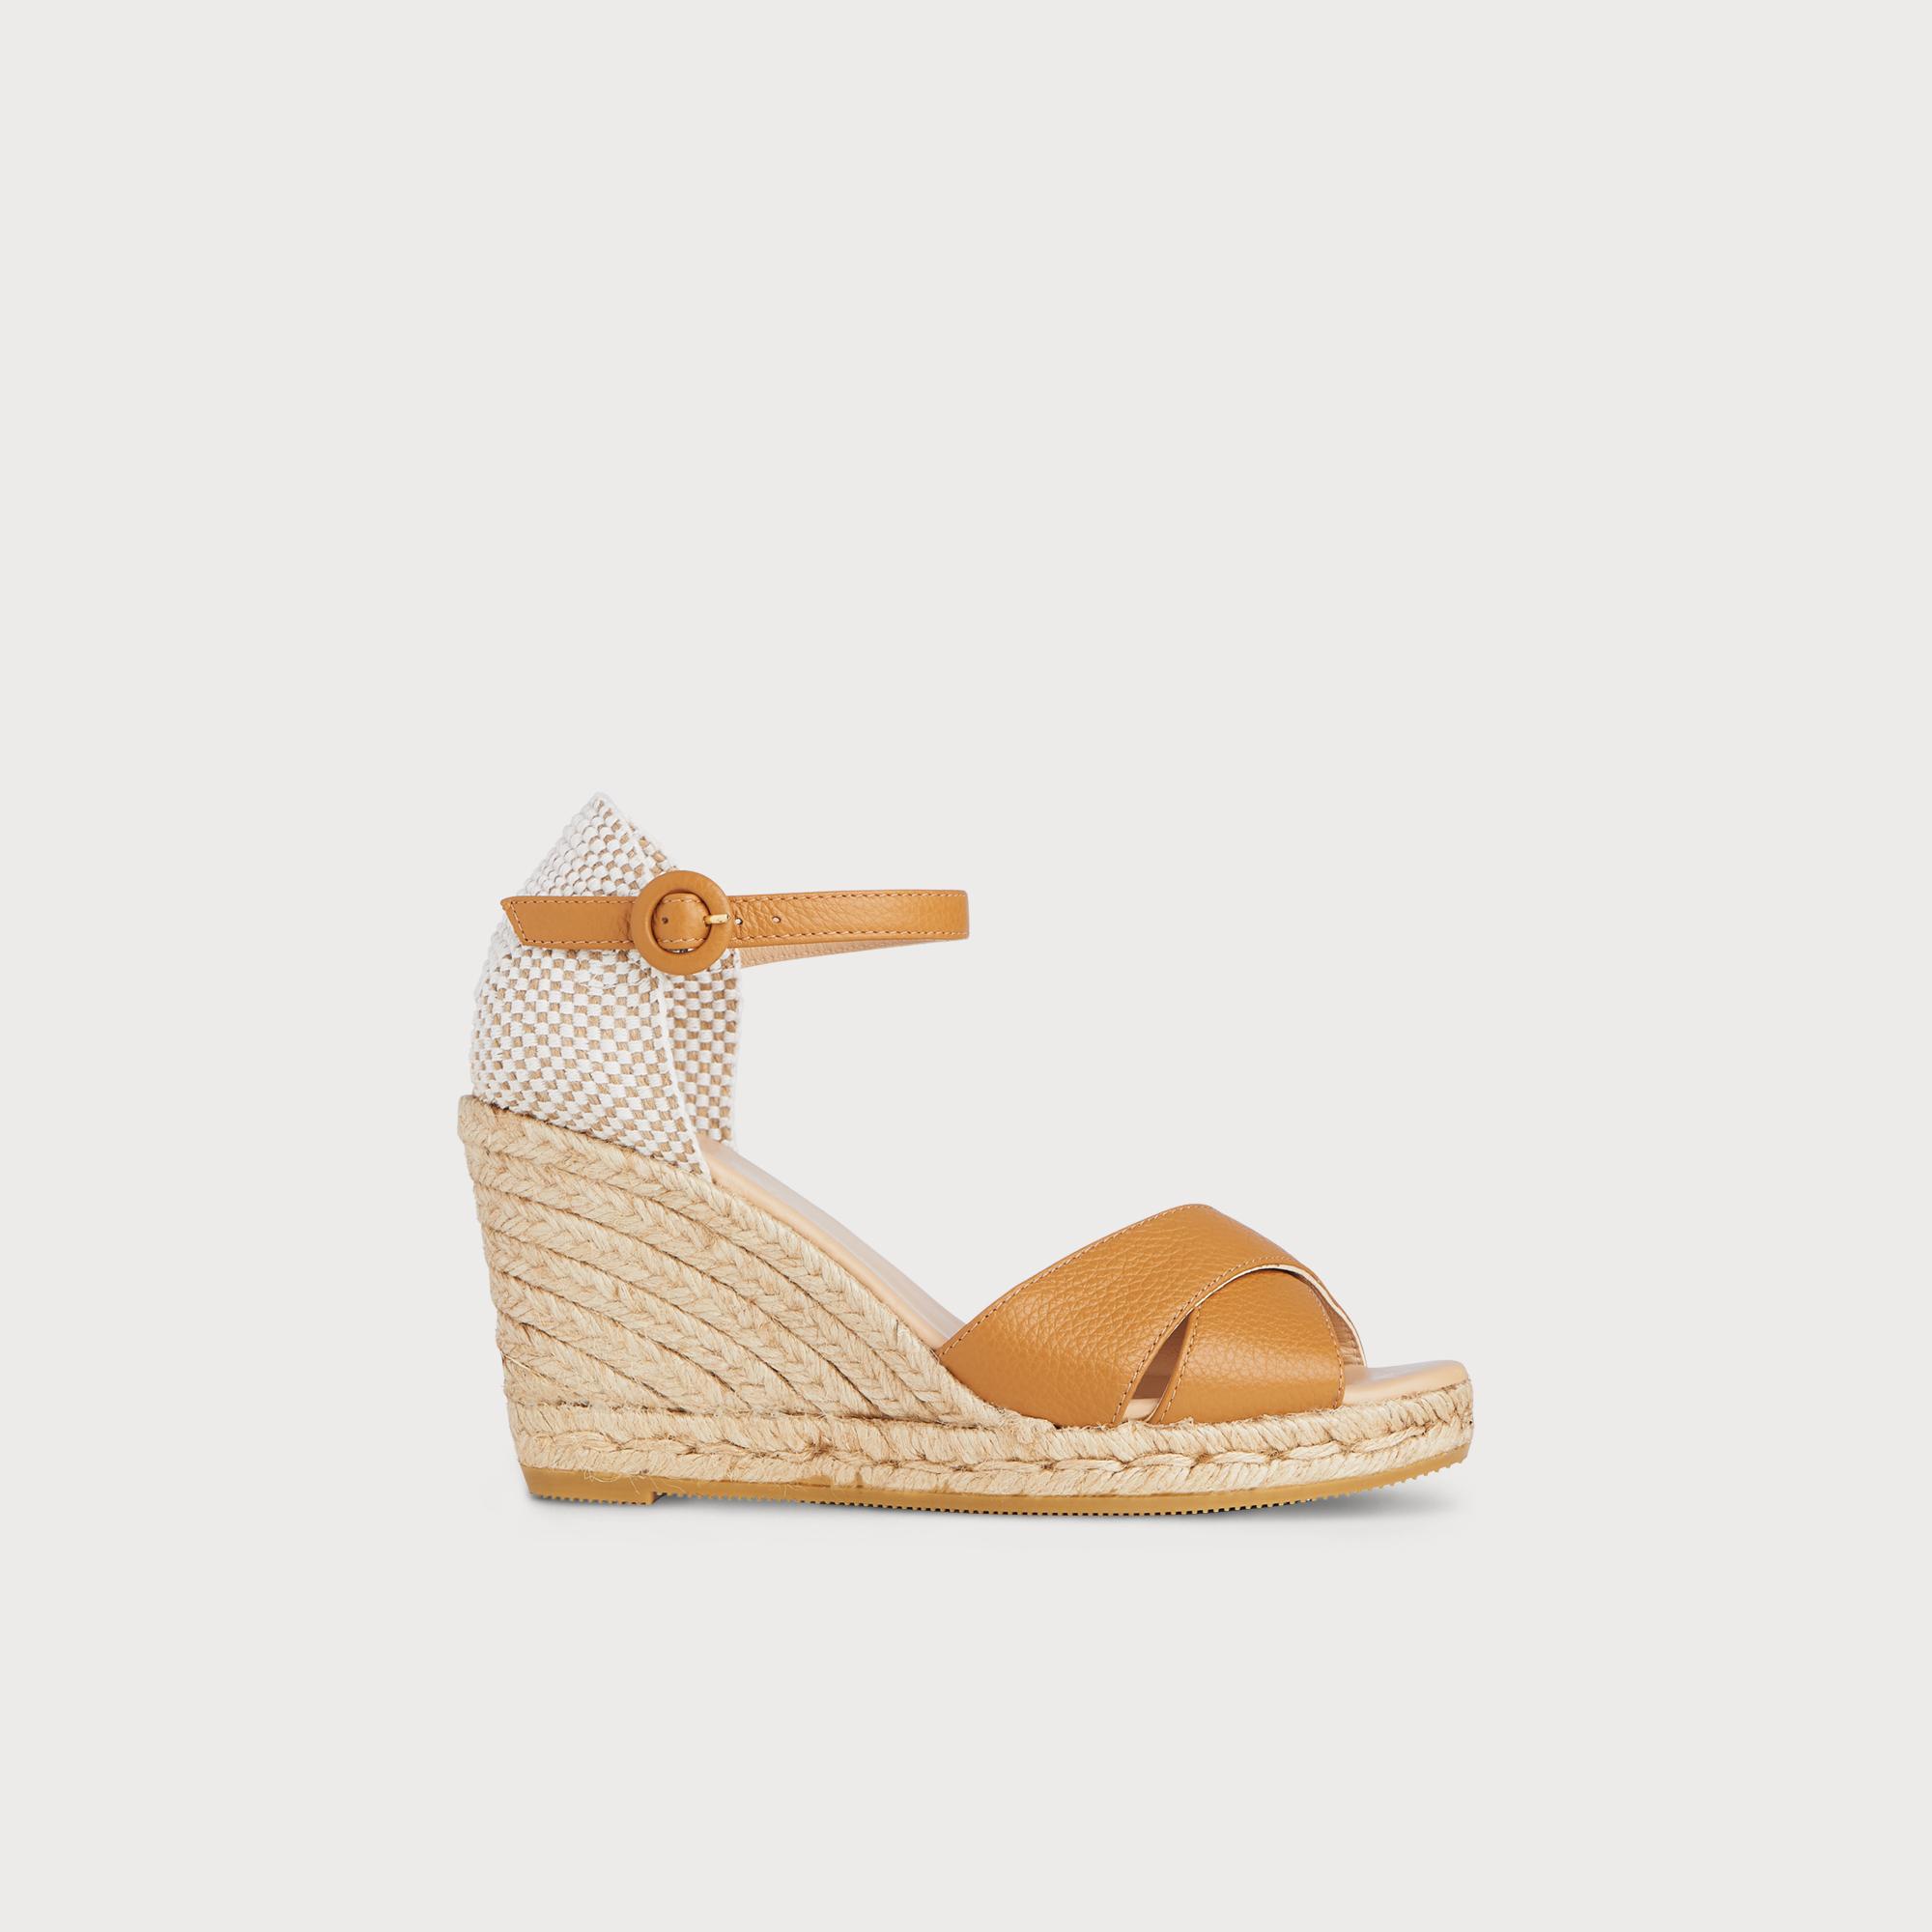 Neave Beige Suede Strappy Sandals | Shoes | L.K.Bennett